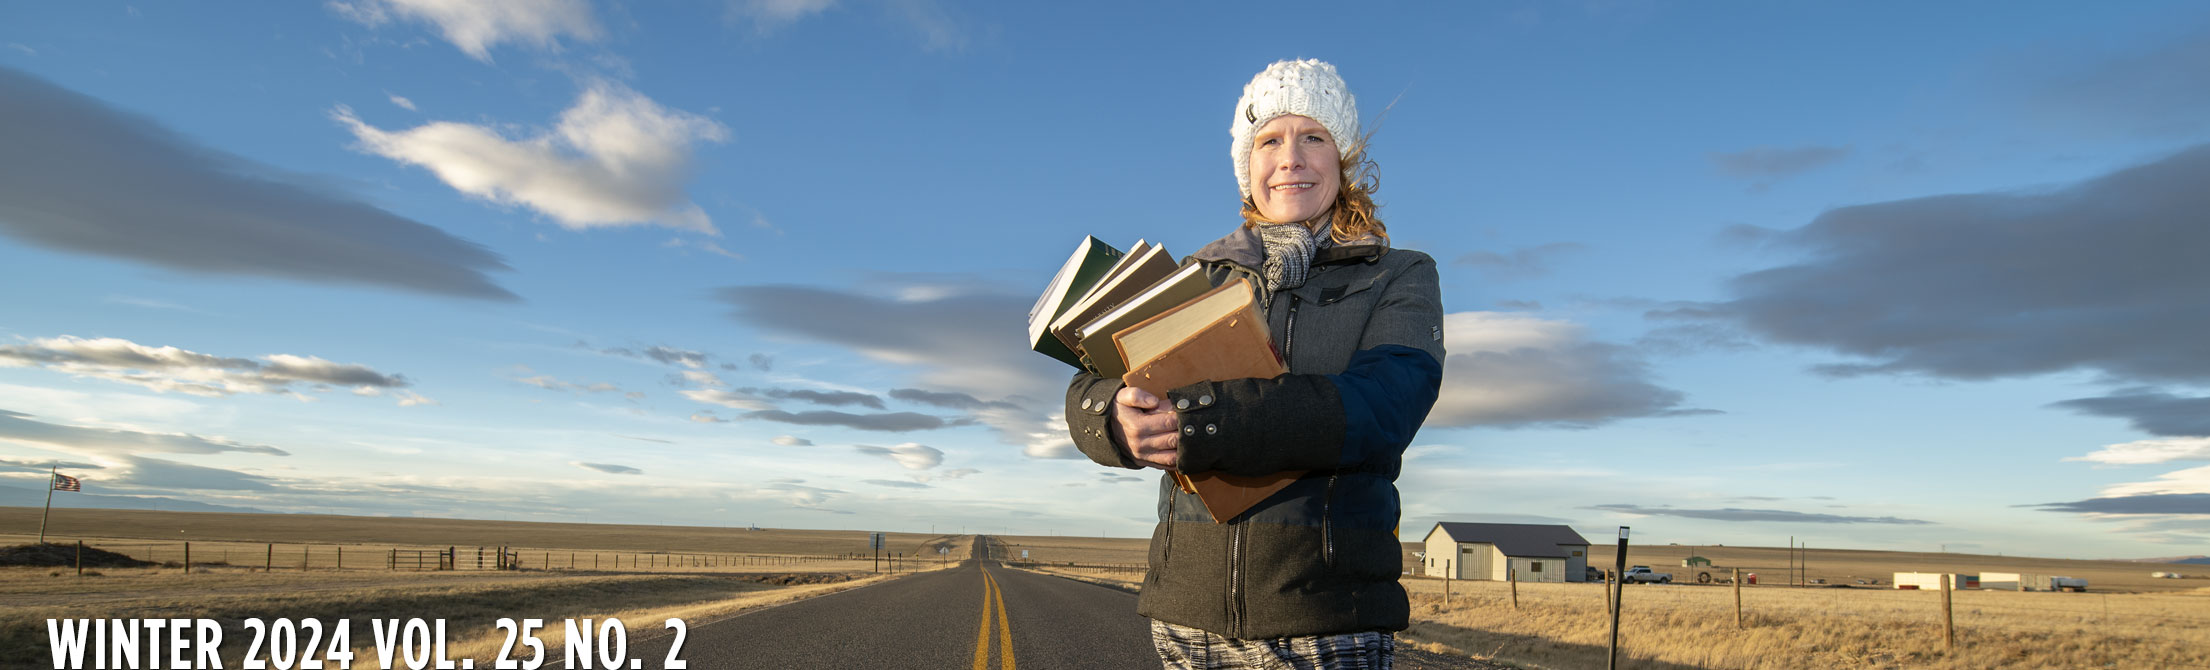 person standing in front of an open highway holding a stack of books